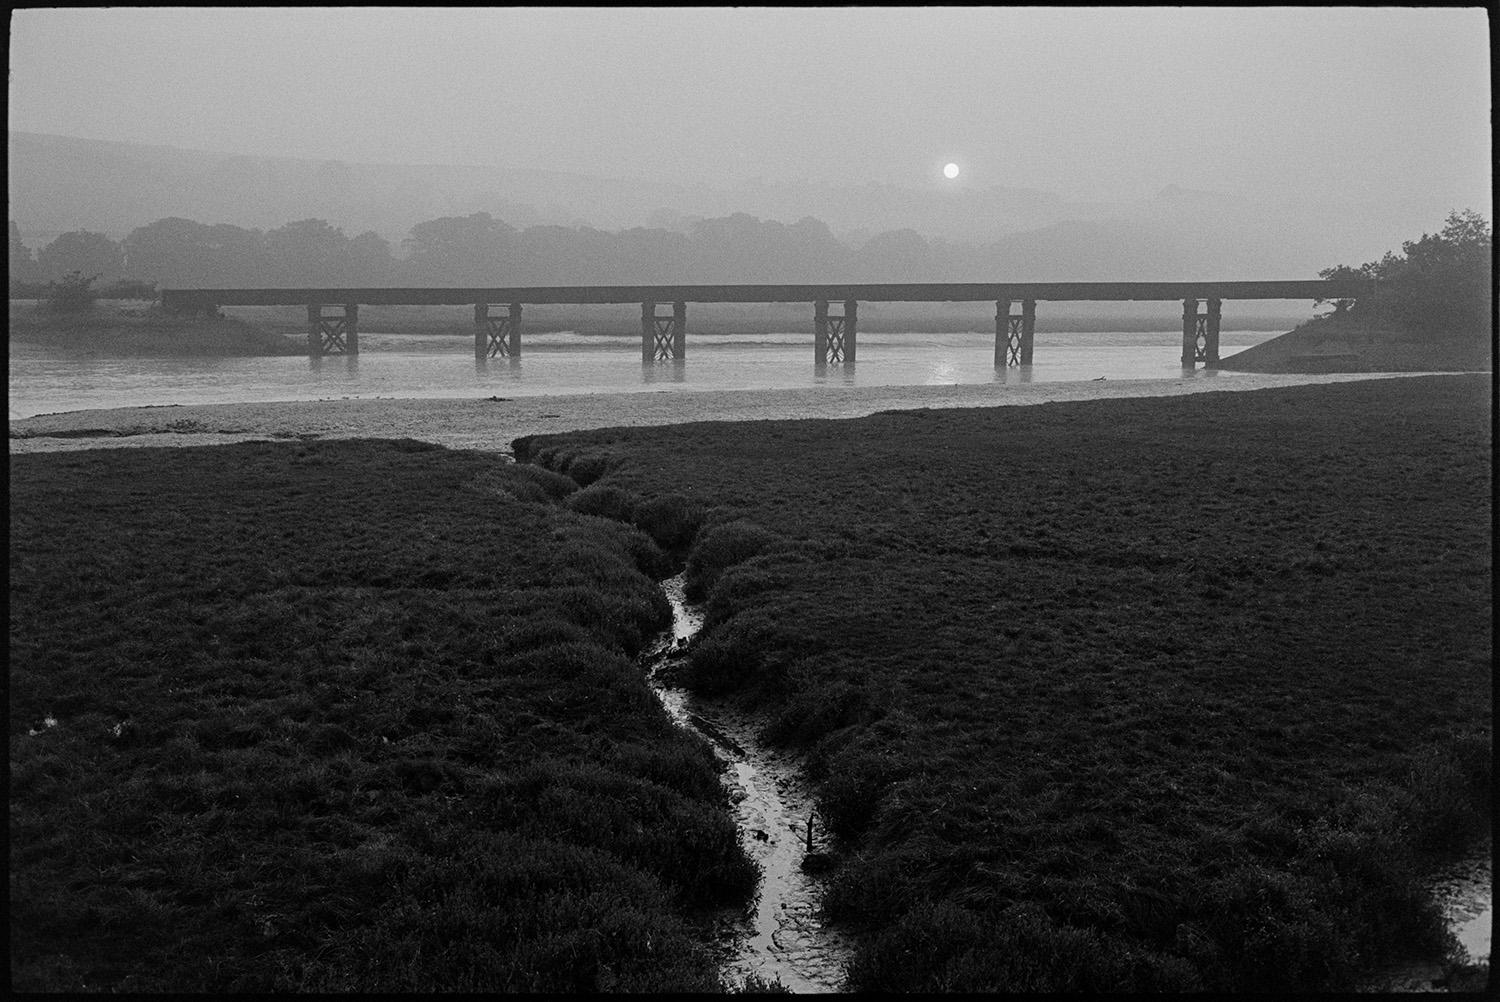 Sun rising over railway bridge over river. 
[The sun rising over a landscape at Pillmouth, Landcross with the railway bridge crossing the River Torridge. Marshland is visible in the foreground.]